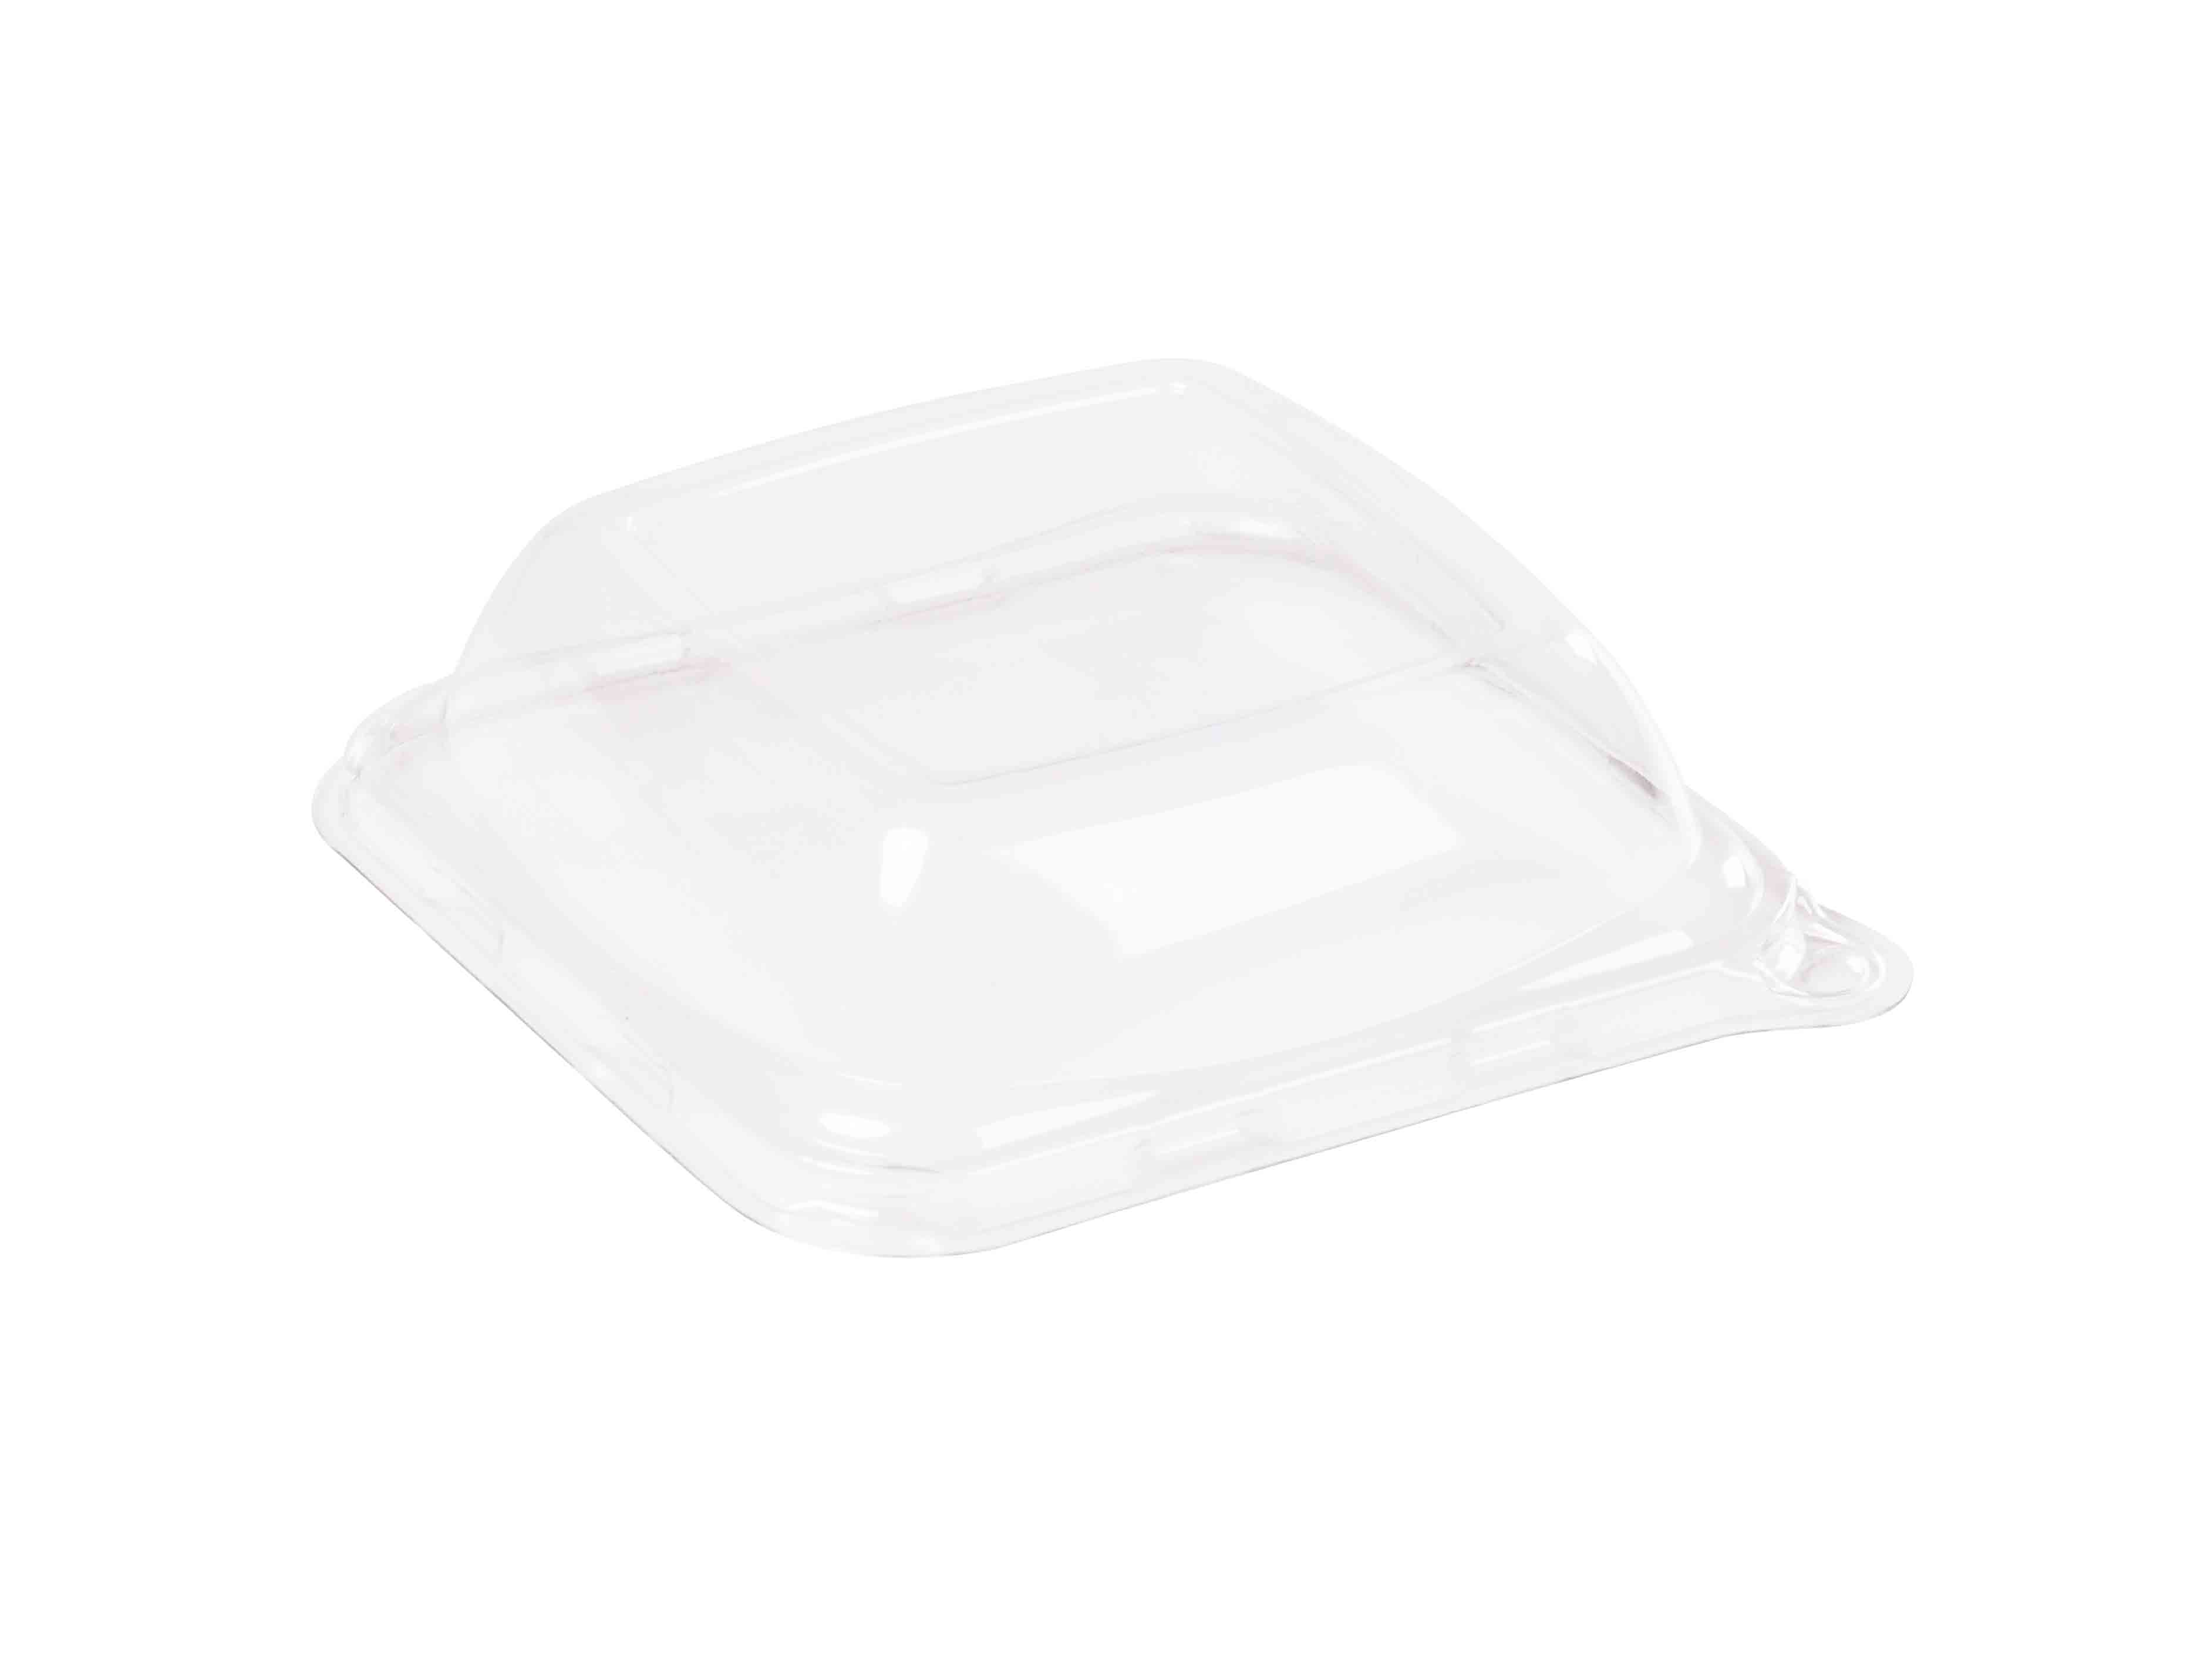 PET lid for 6X6 shallow tray 